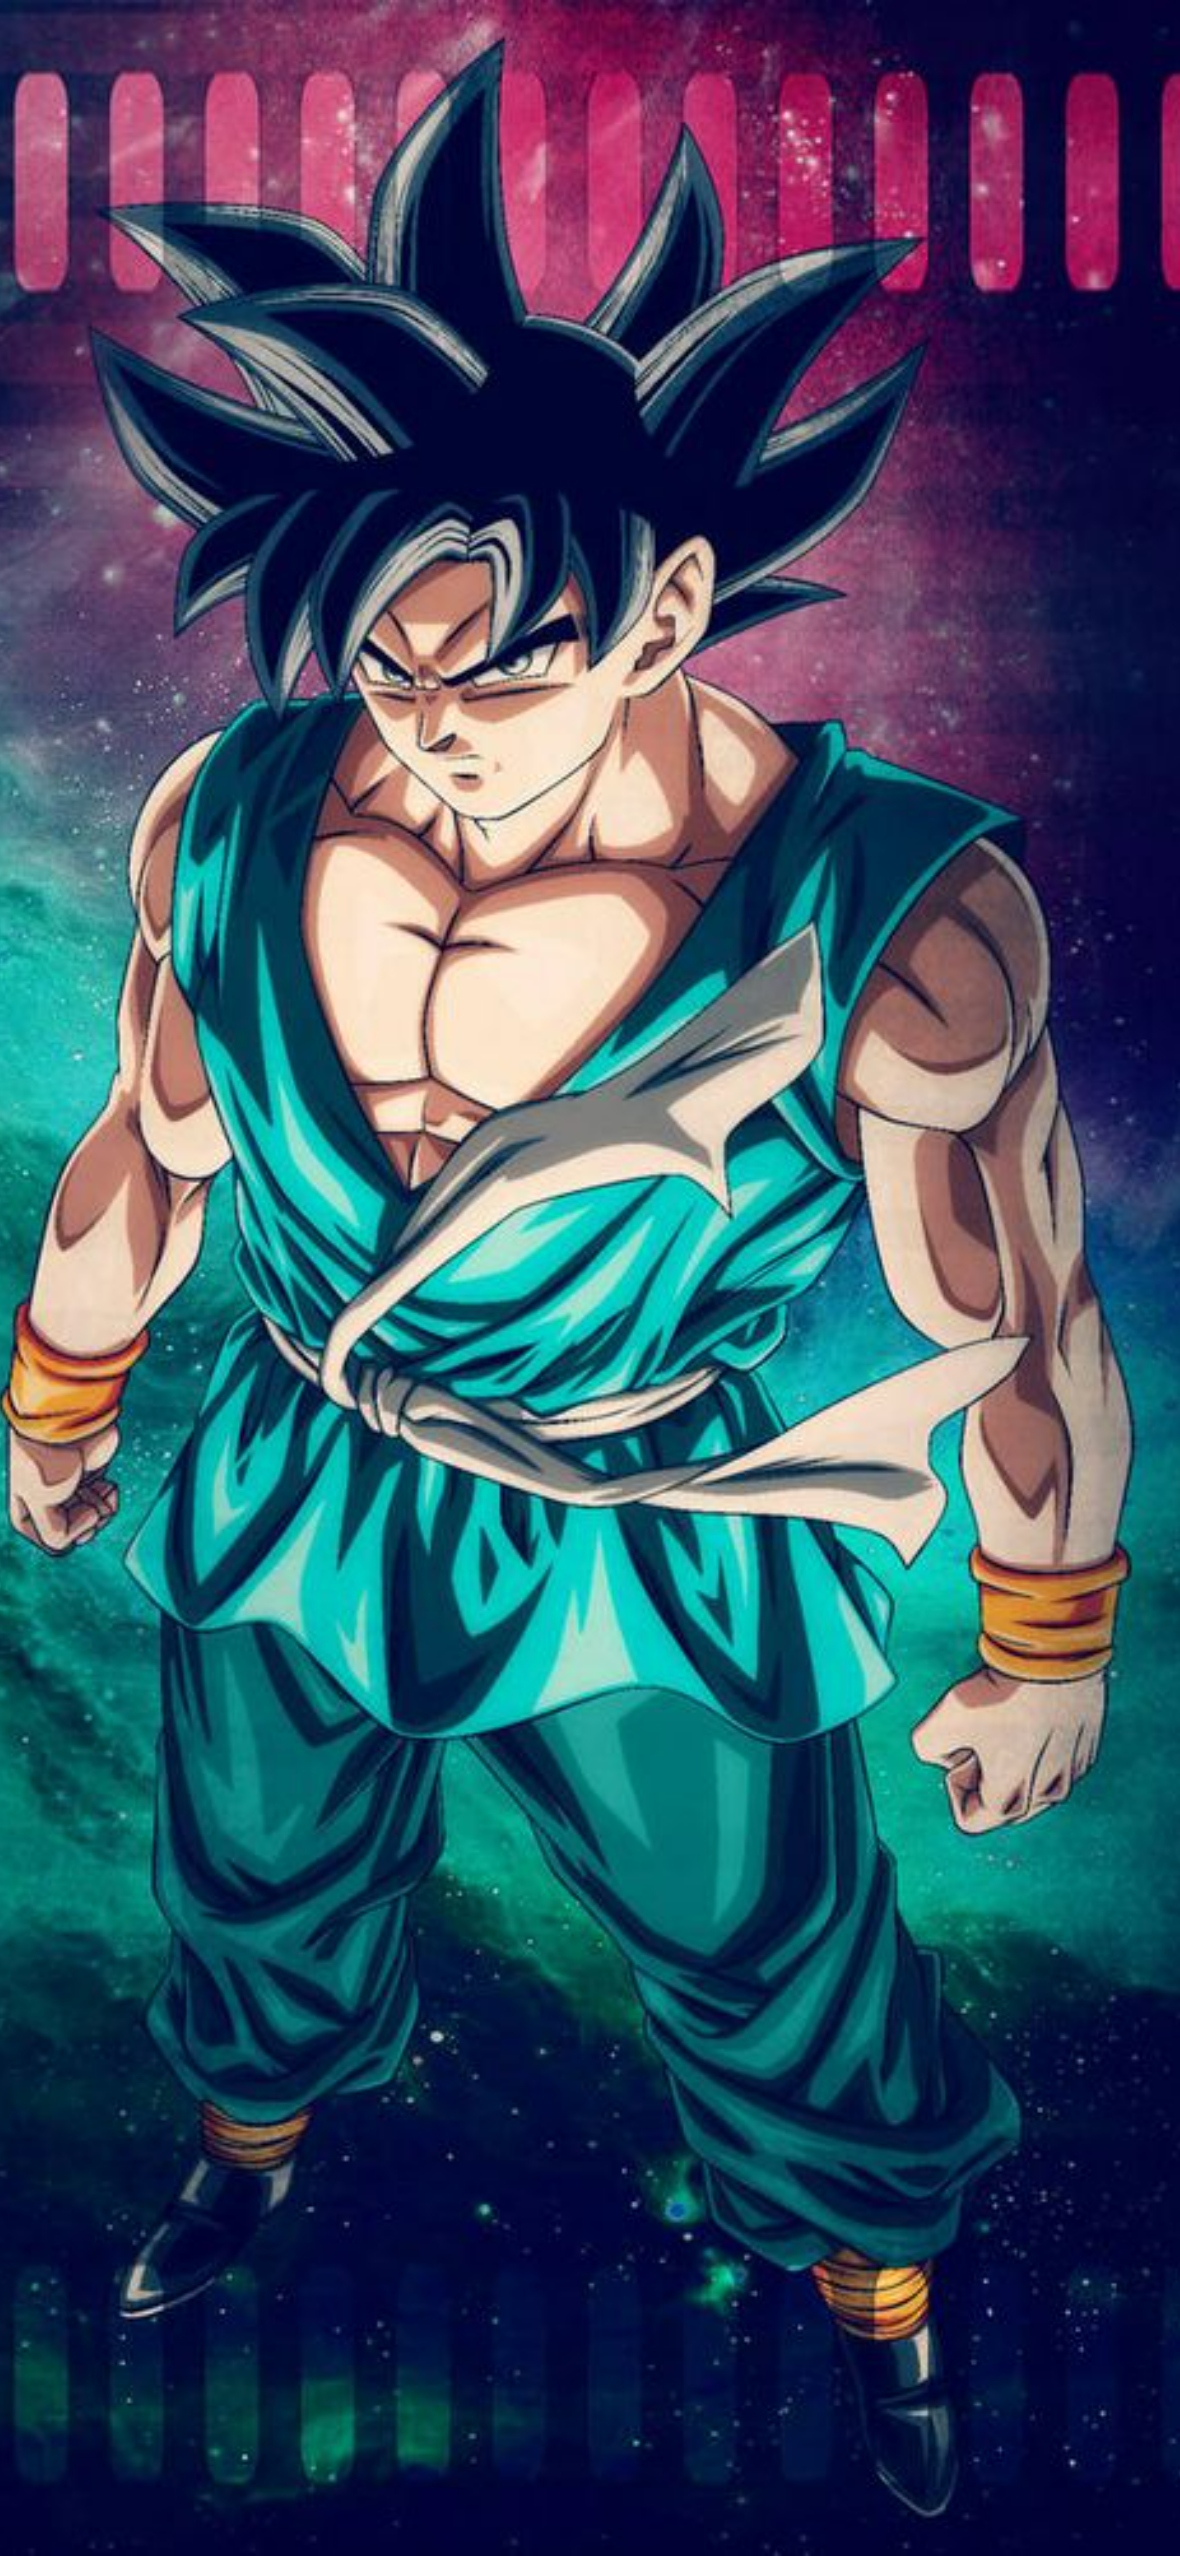 Top 10 Best Dragon Ball Z iPhone Wallpapers [ HQ ]